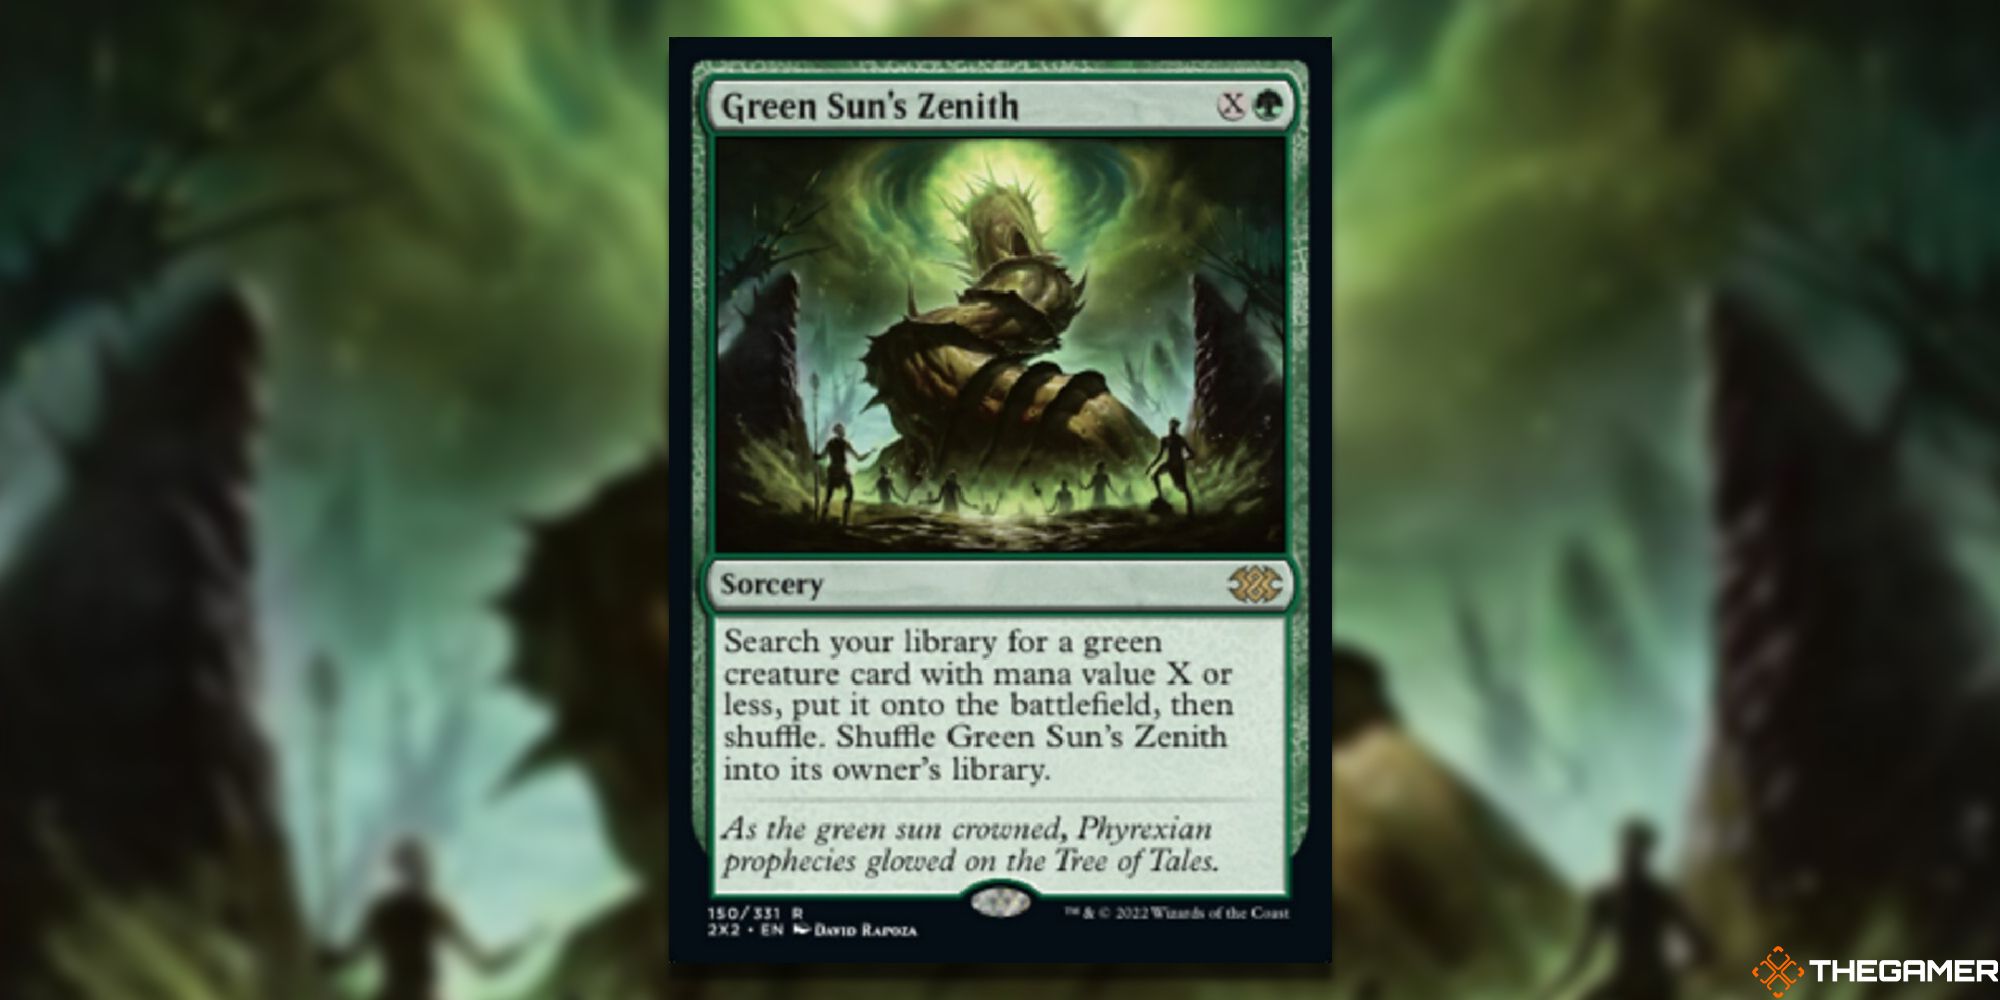 Magic: The Gathering Green Sun's Zenith full card with background